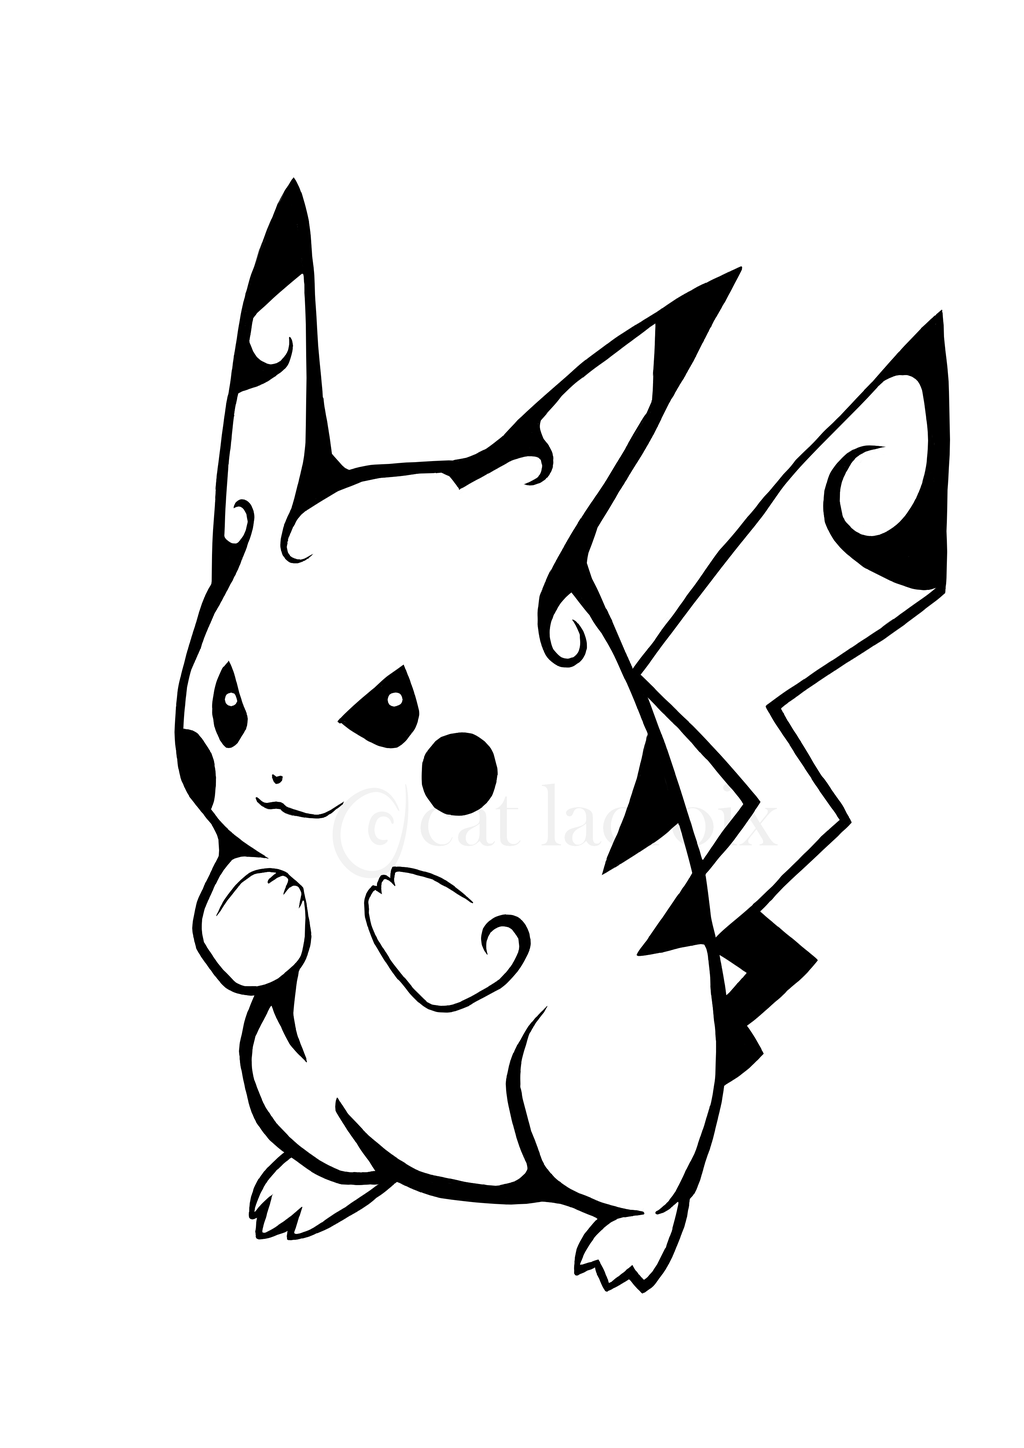 Pikachu PNG Black And White - 77045